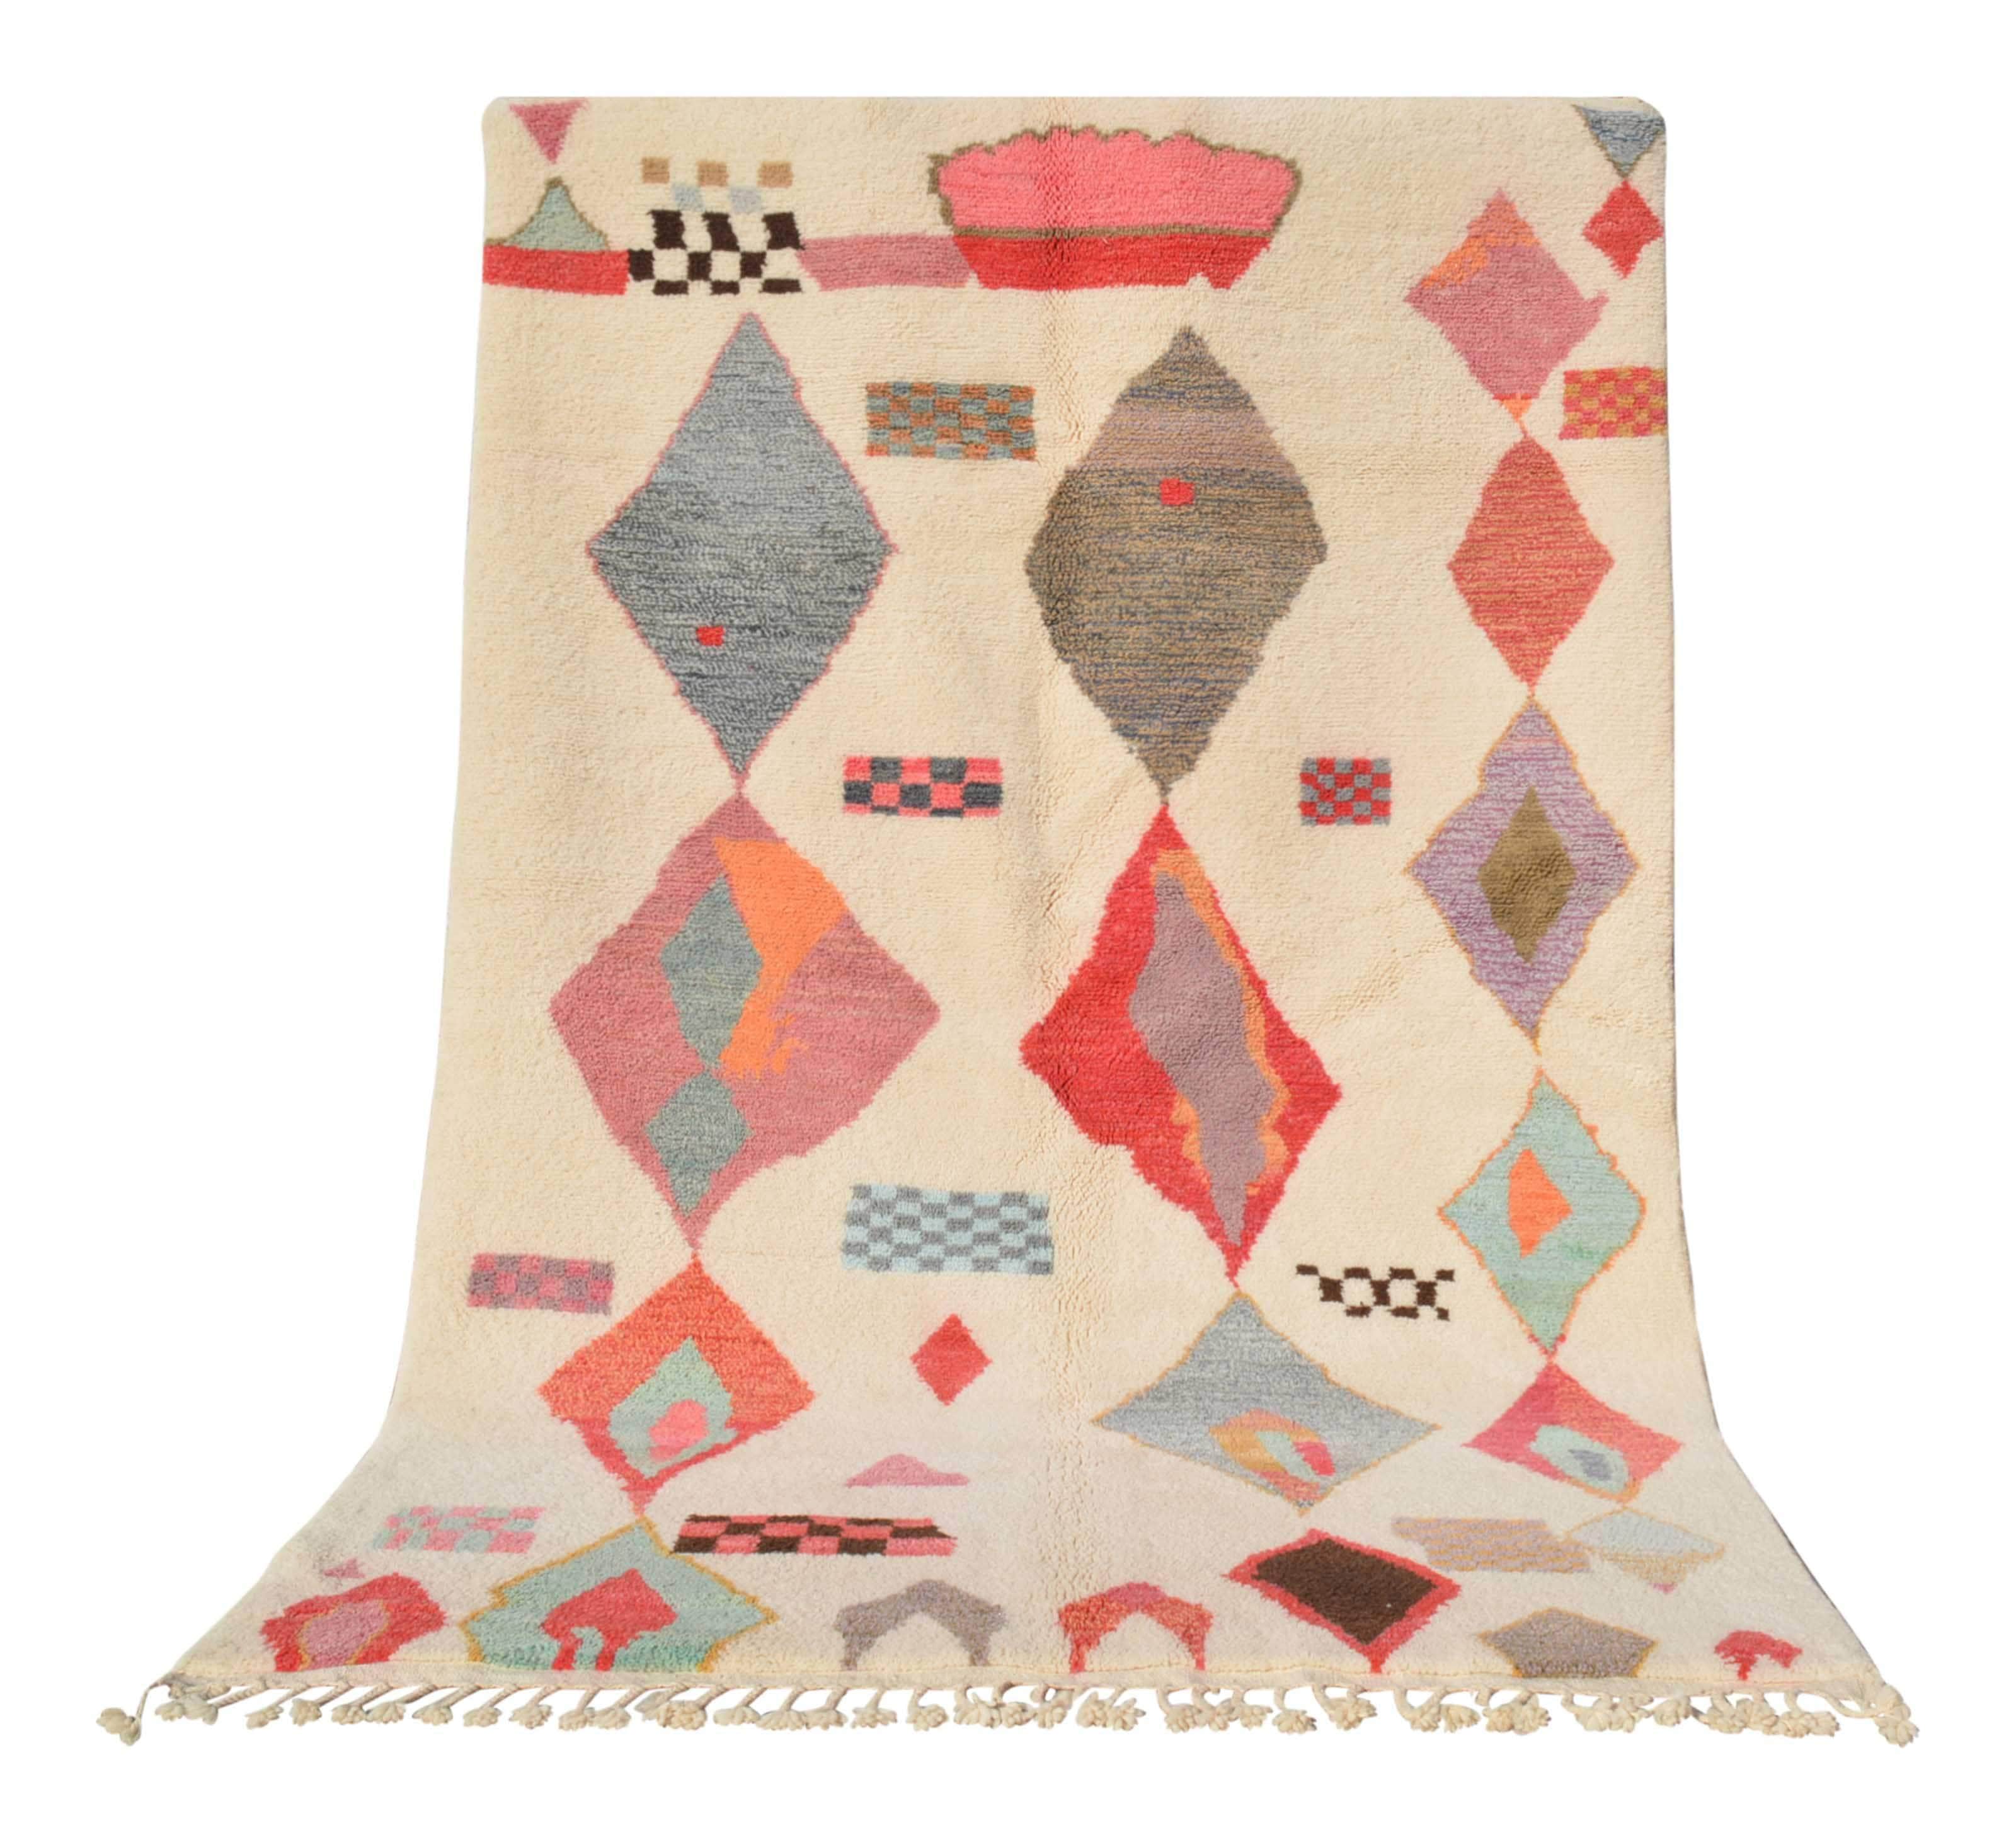 Moroccan Rug Chromatic Charm - Handmade Moroccan Rug with a Colorful New Design - Add a pop of color to your home Illuminate Collective